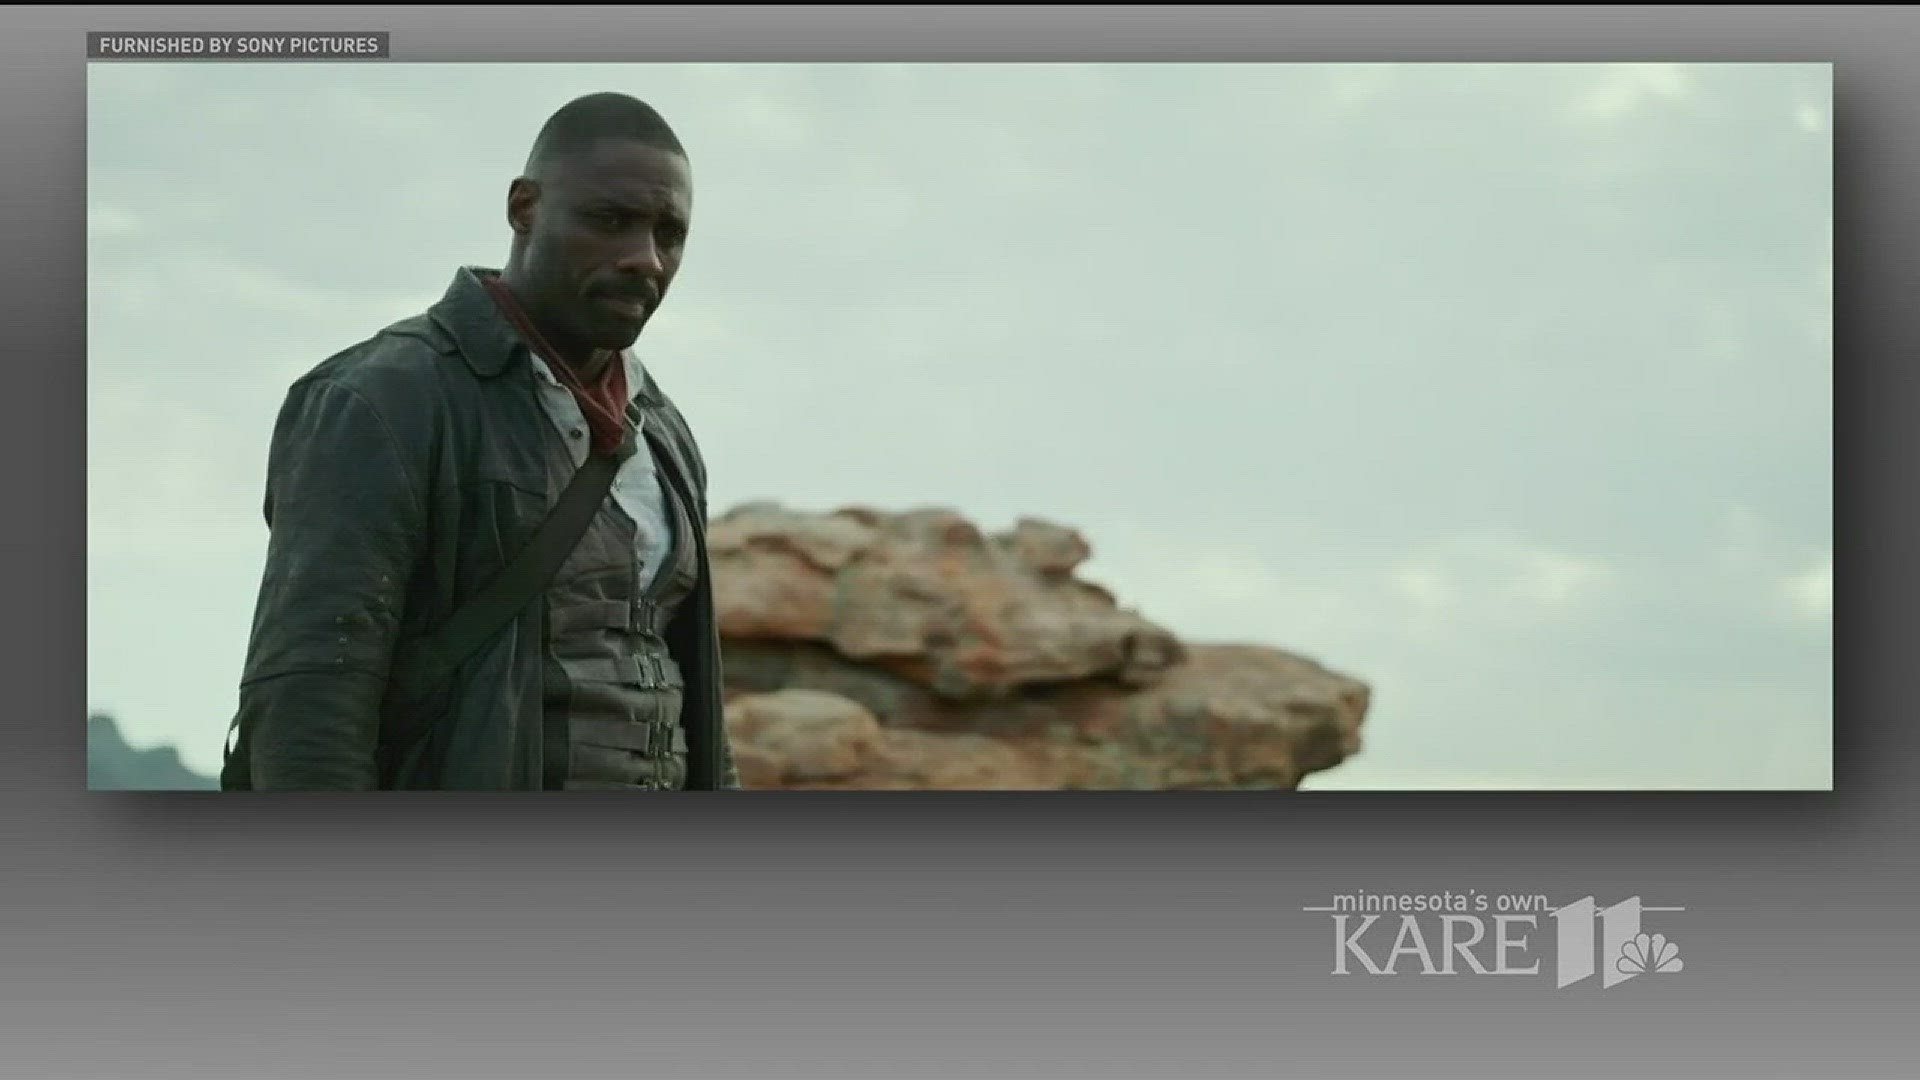 The film based on the first book in the Stephen King series stars Idris Elba and Matthew MCConaughey.